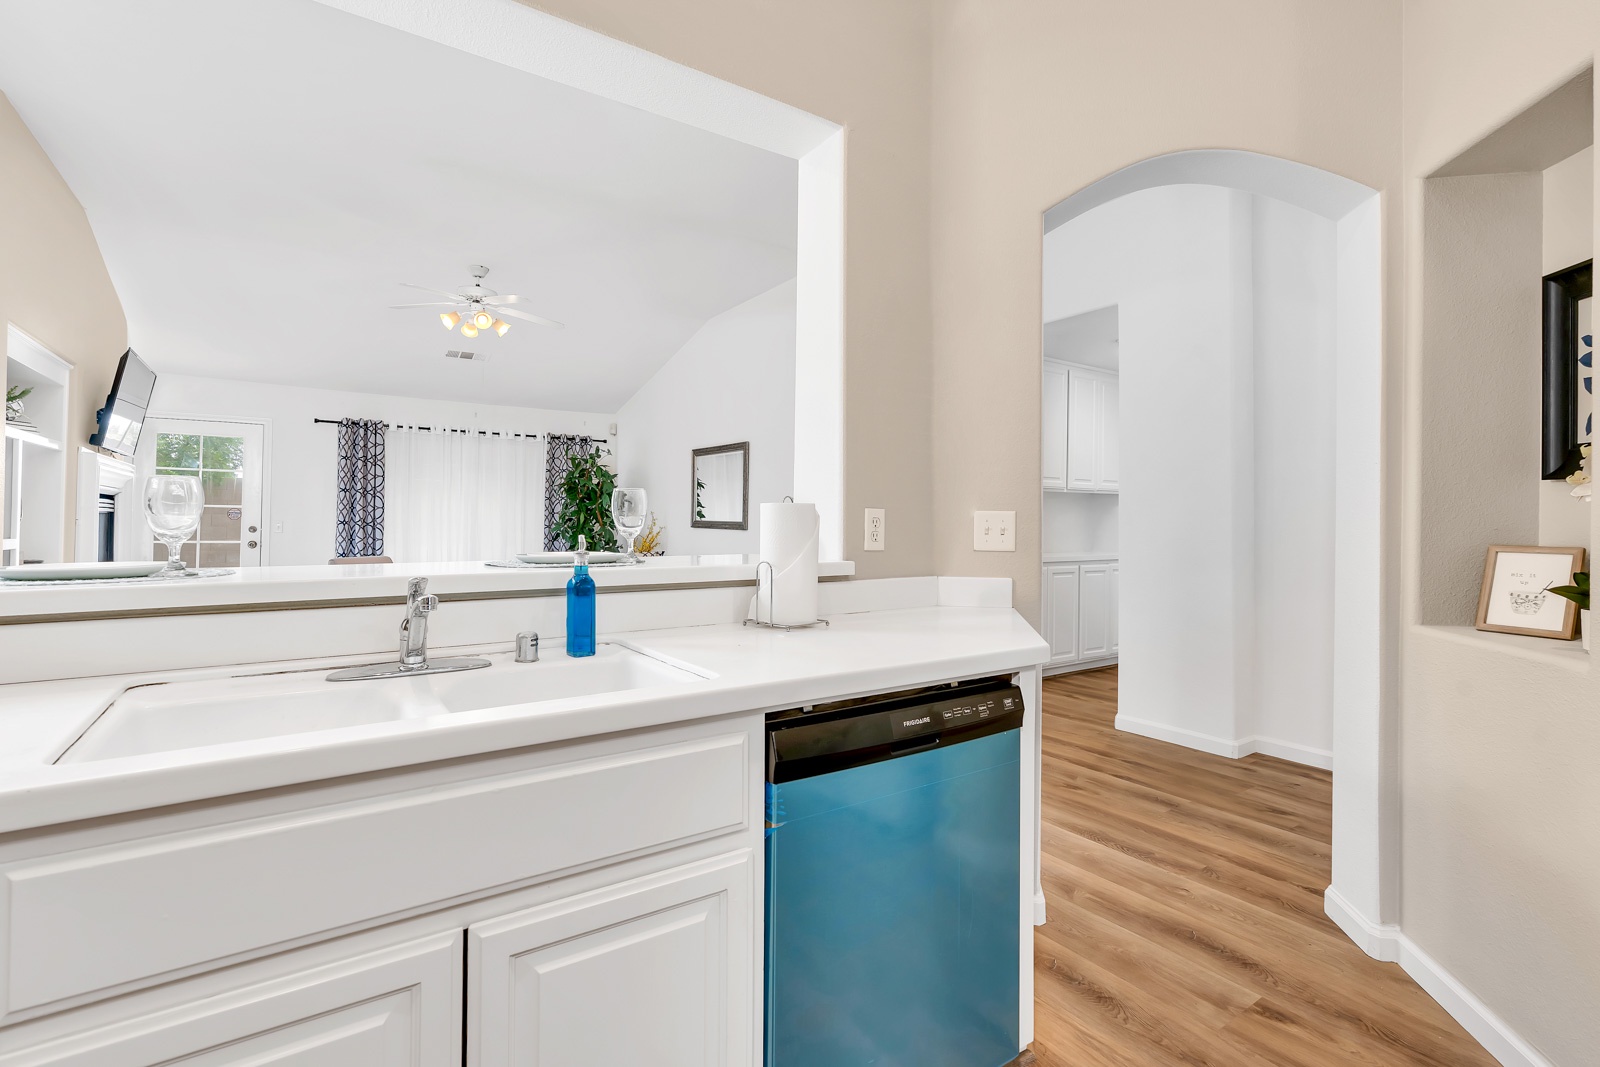 The kitchen is spacious & well-equipped, offering all the comforts of home